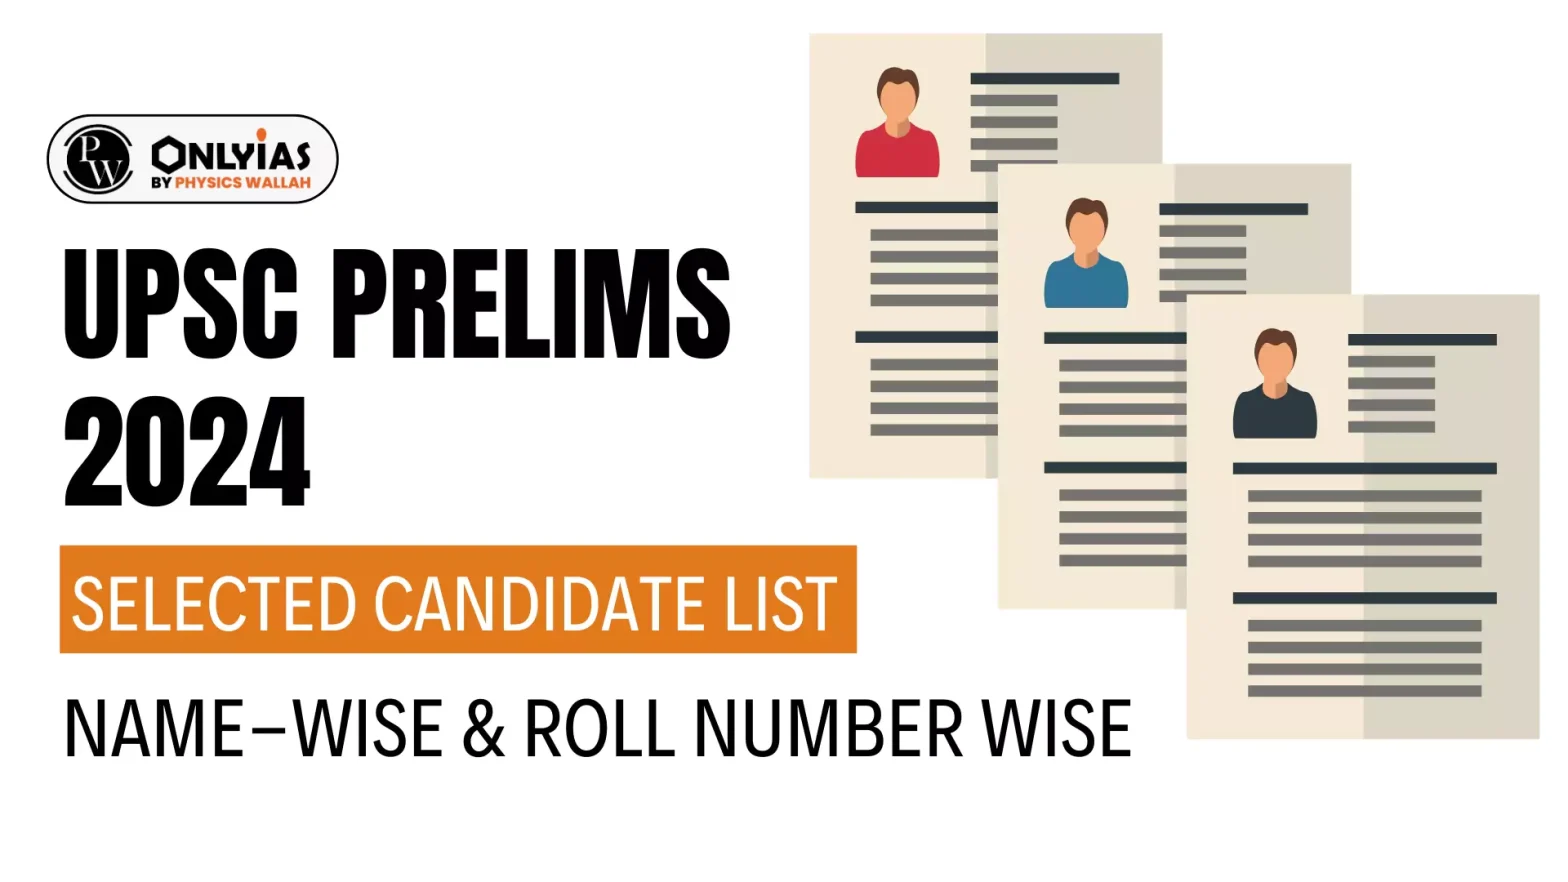 UPSC Prelims 2024 Selected Candidate List, Name-wise & Roll Number Wise